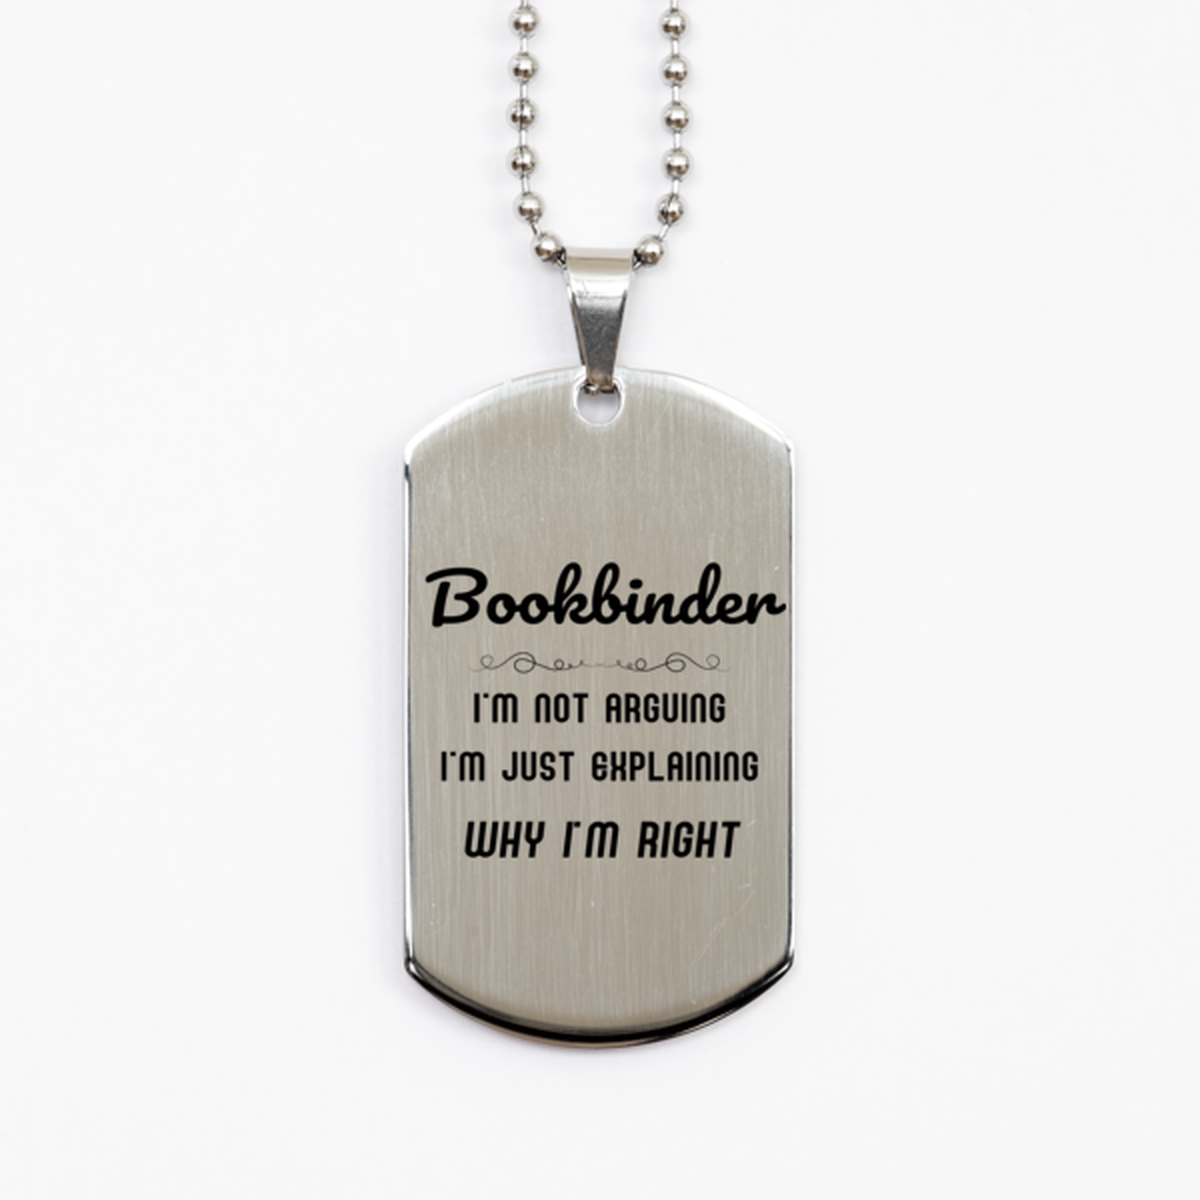 Bookbinder I'm not Arguing. I'm Just Explaining Why I'm RIGHT Silver Dog Tag, Funny Saying Quote Bookbinder Gifts For Bookbinder Graduation Birthday Christmas Gifts for Men Women Coworker